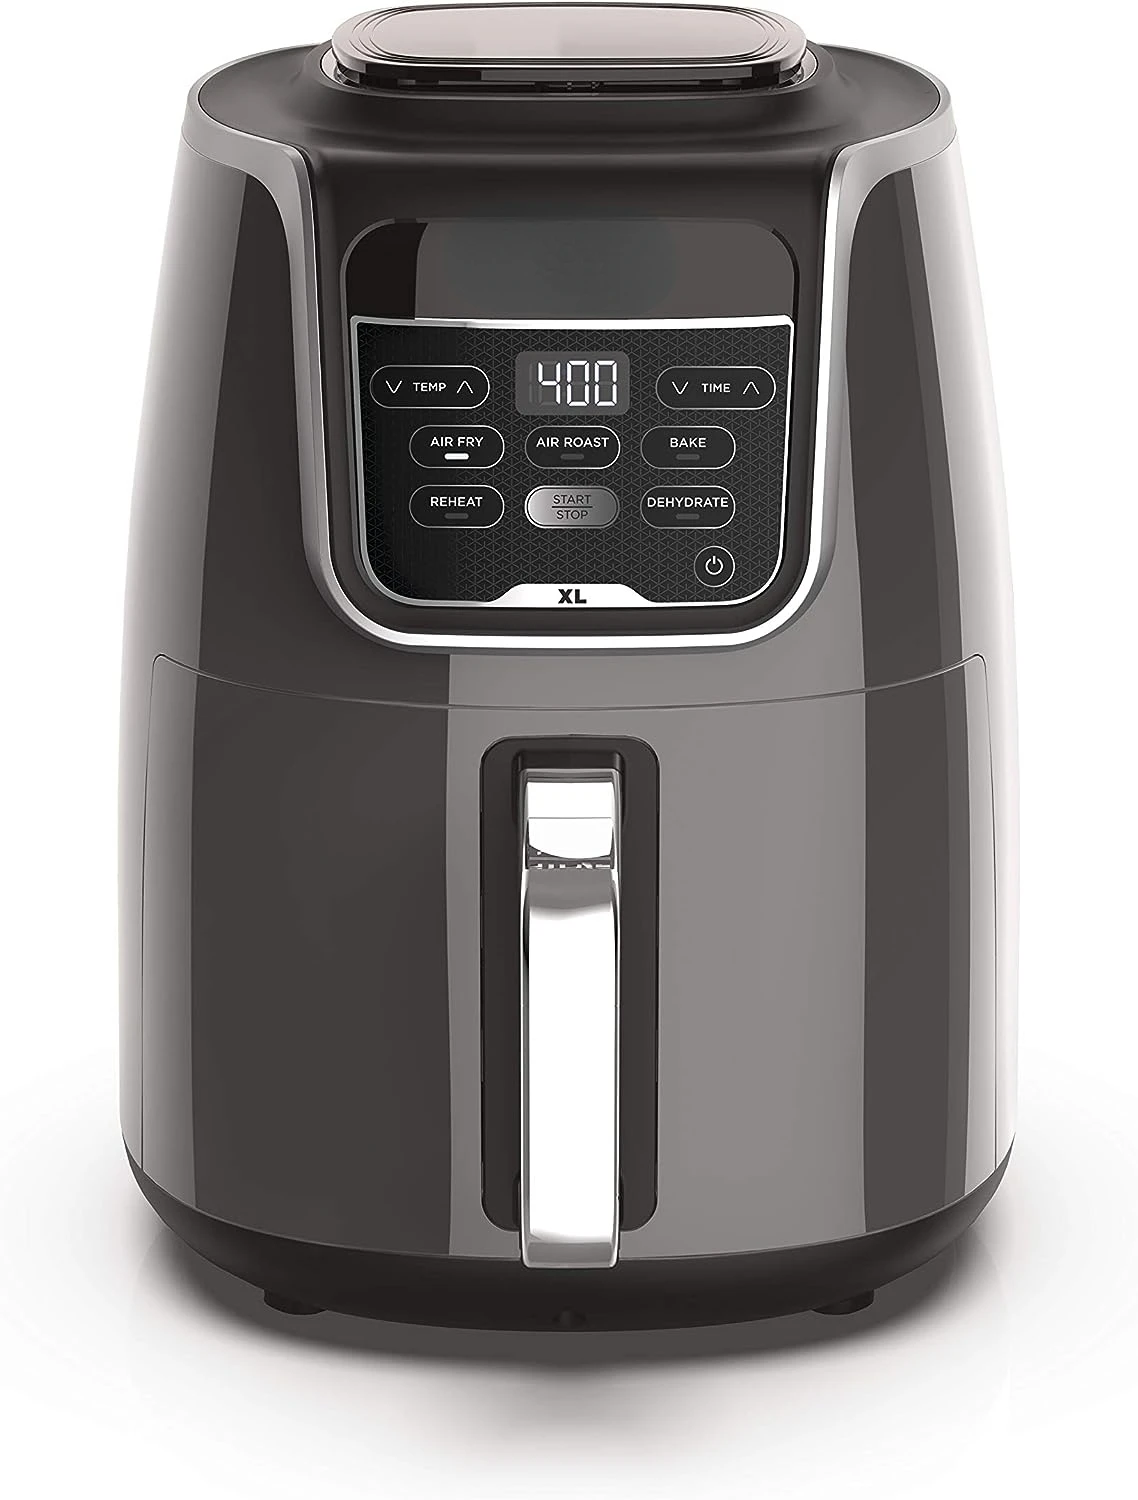 

Air Fryer XL, 5.5 Qt. Capacity that can Air Fry, Air Roast, Bake, Reheat & Dehydrate, with Dishwasher Safe, Nonstick Basket